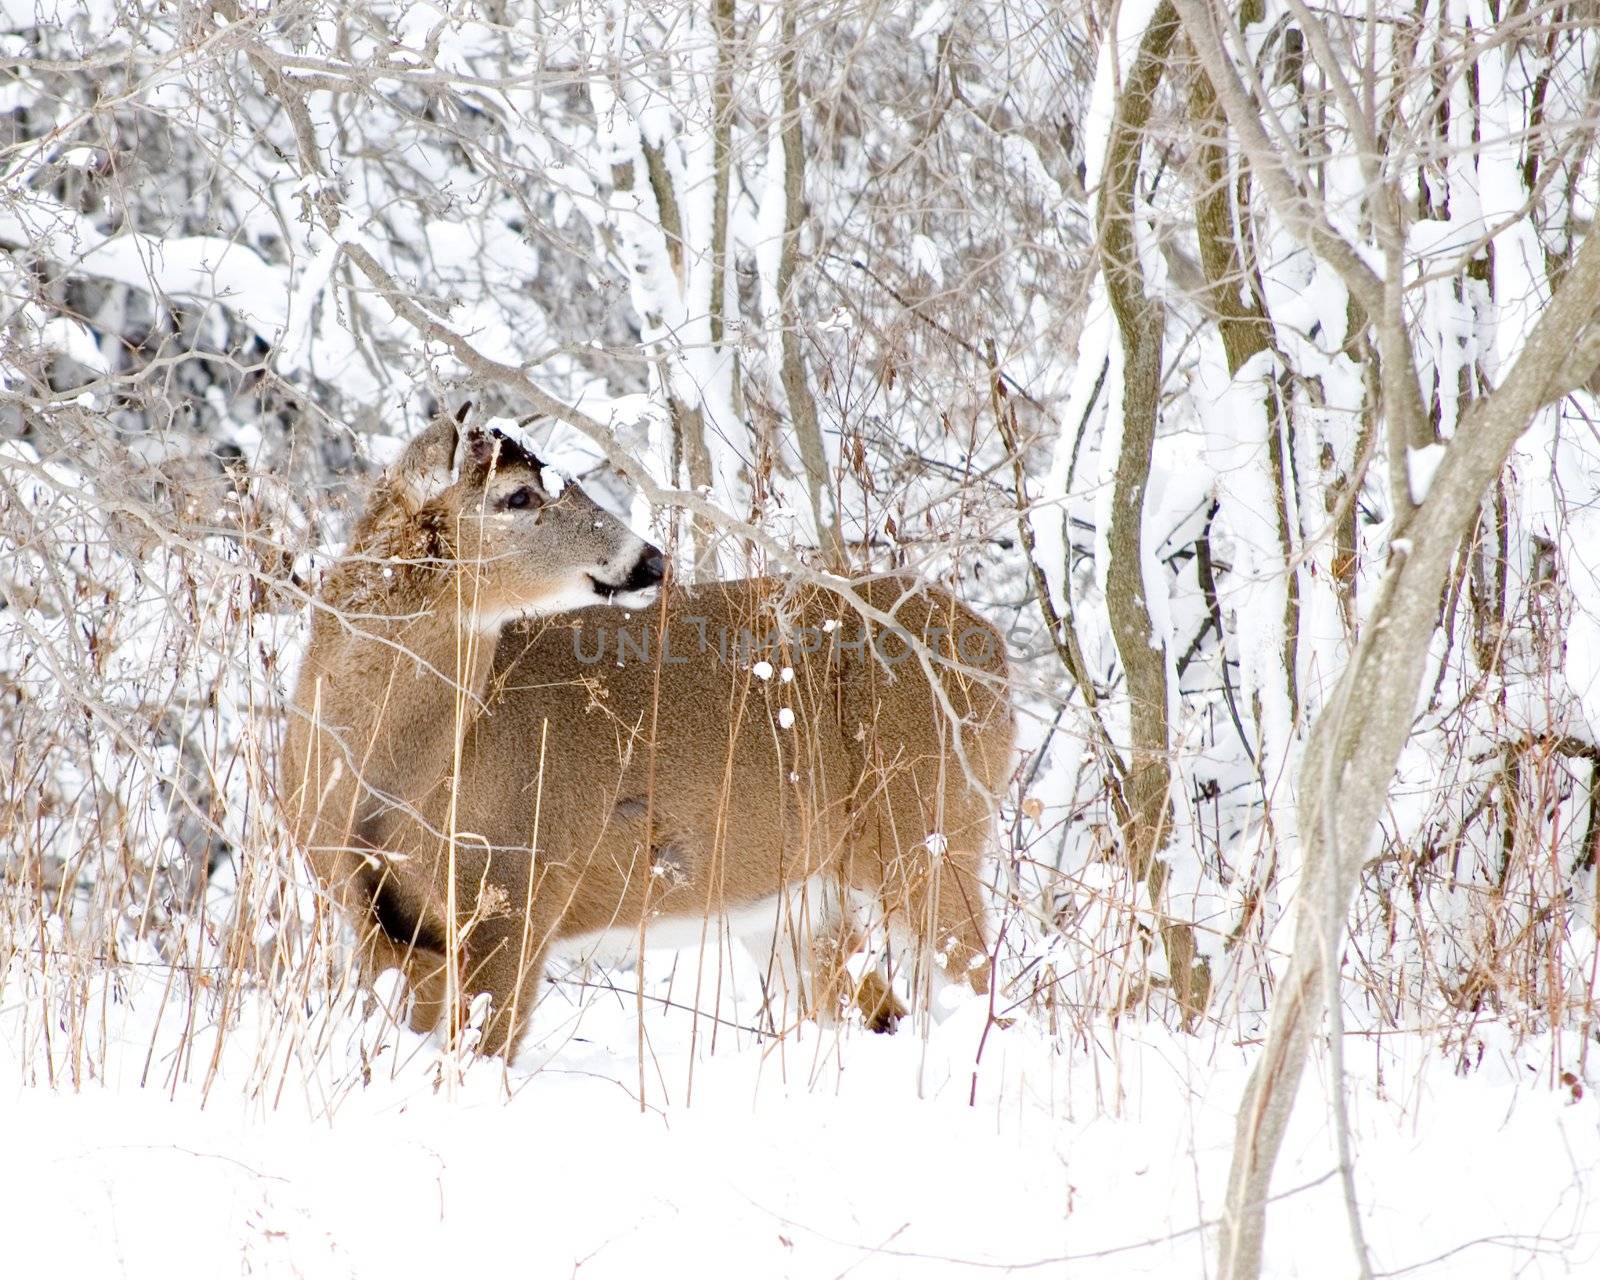 A whitetail deer buck without antlers standing in the woods in winter snow.